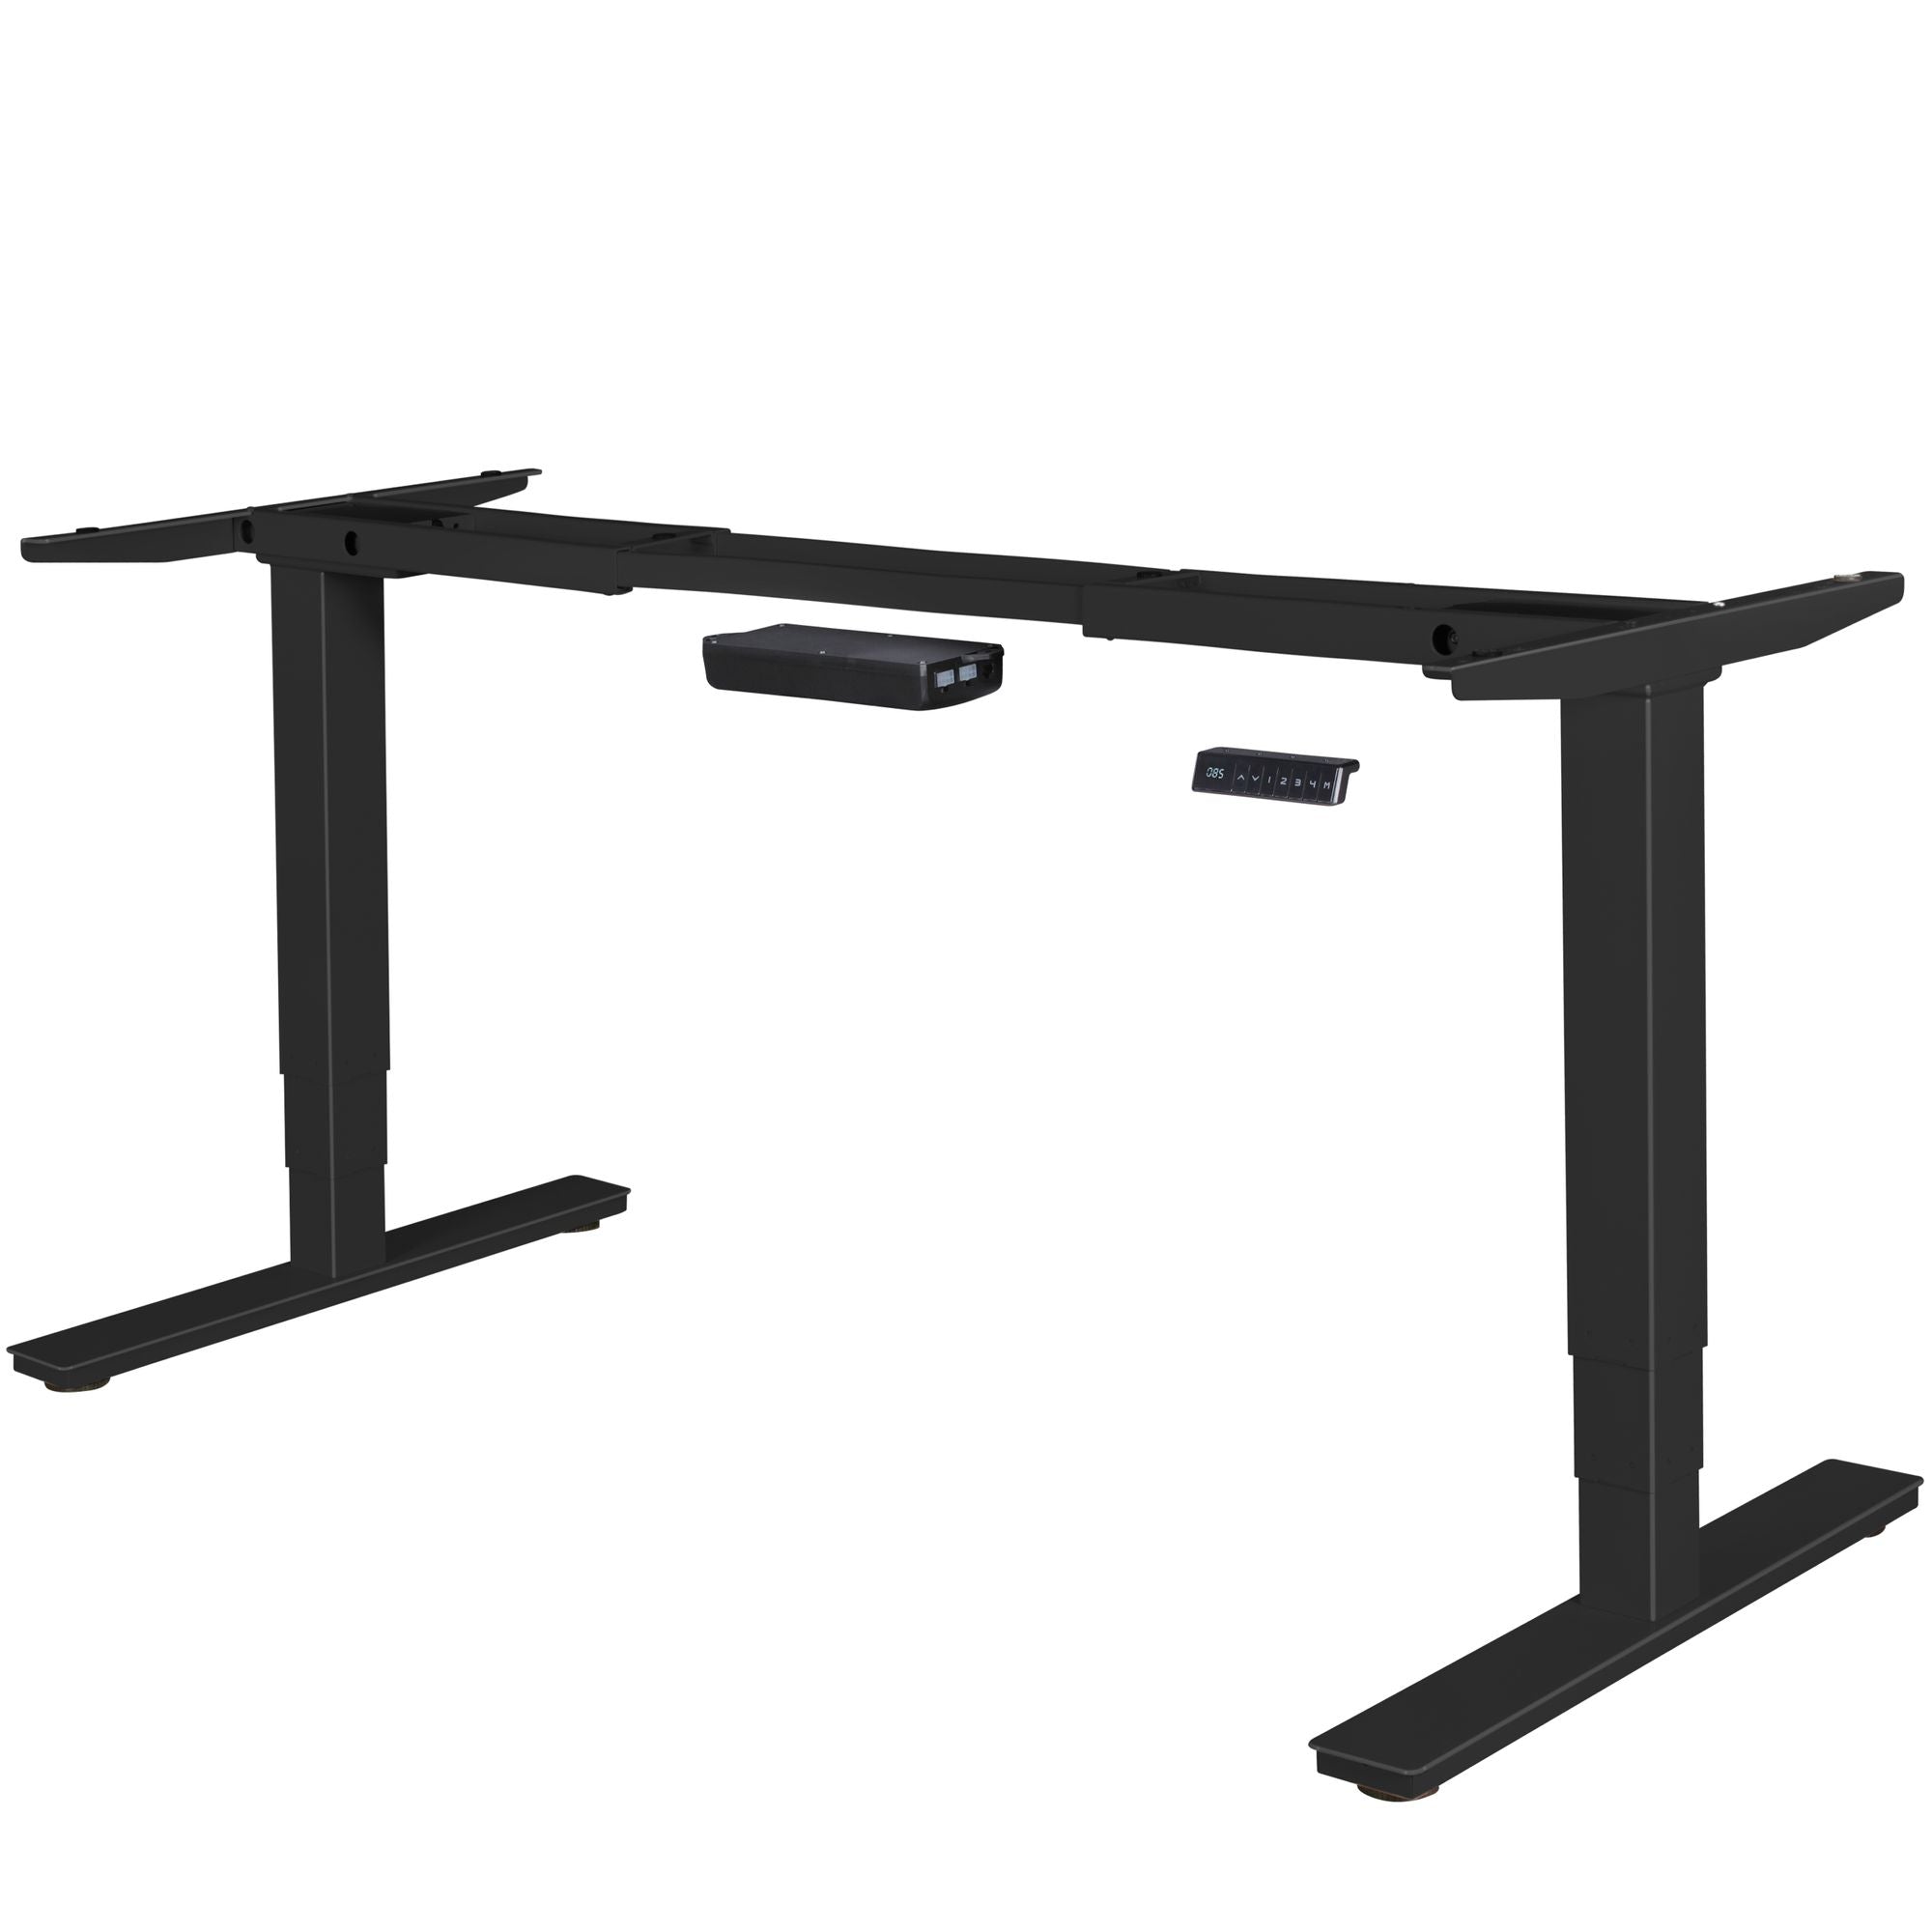 Nancy's Electrically Adjustable Table Base - Table Frame - Table Base with Memory Function - LED Display